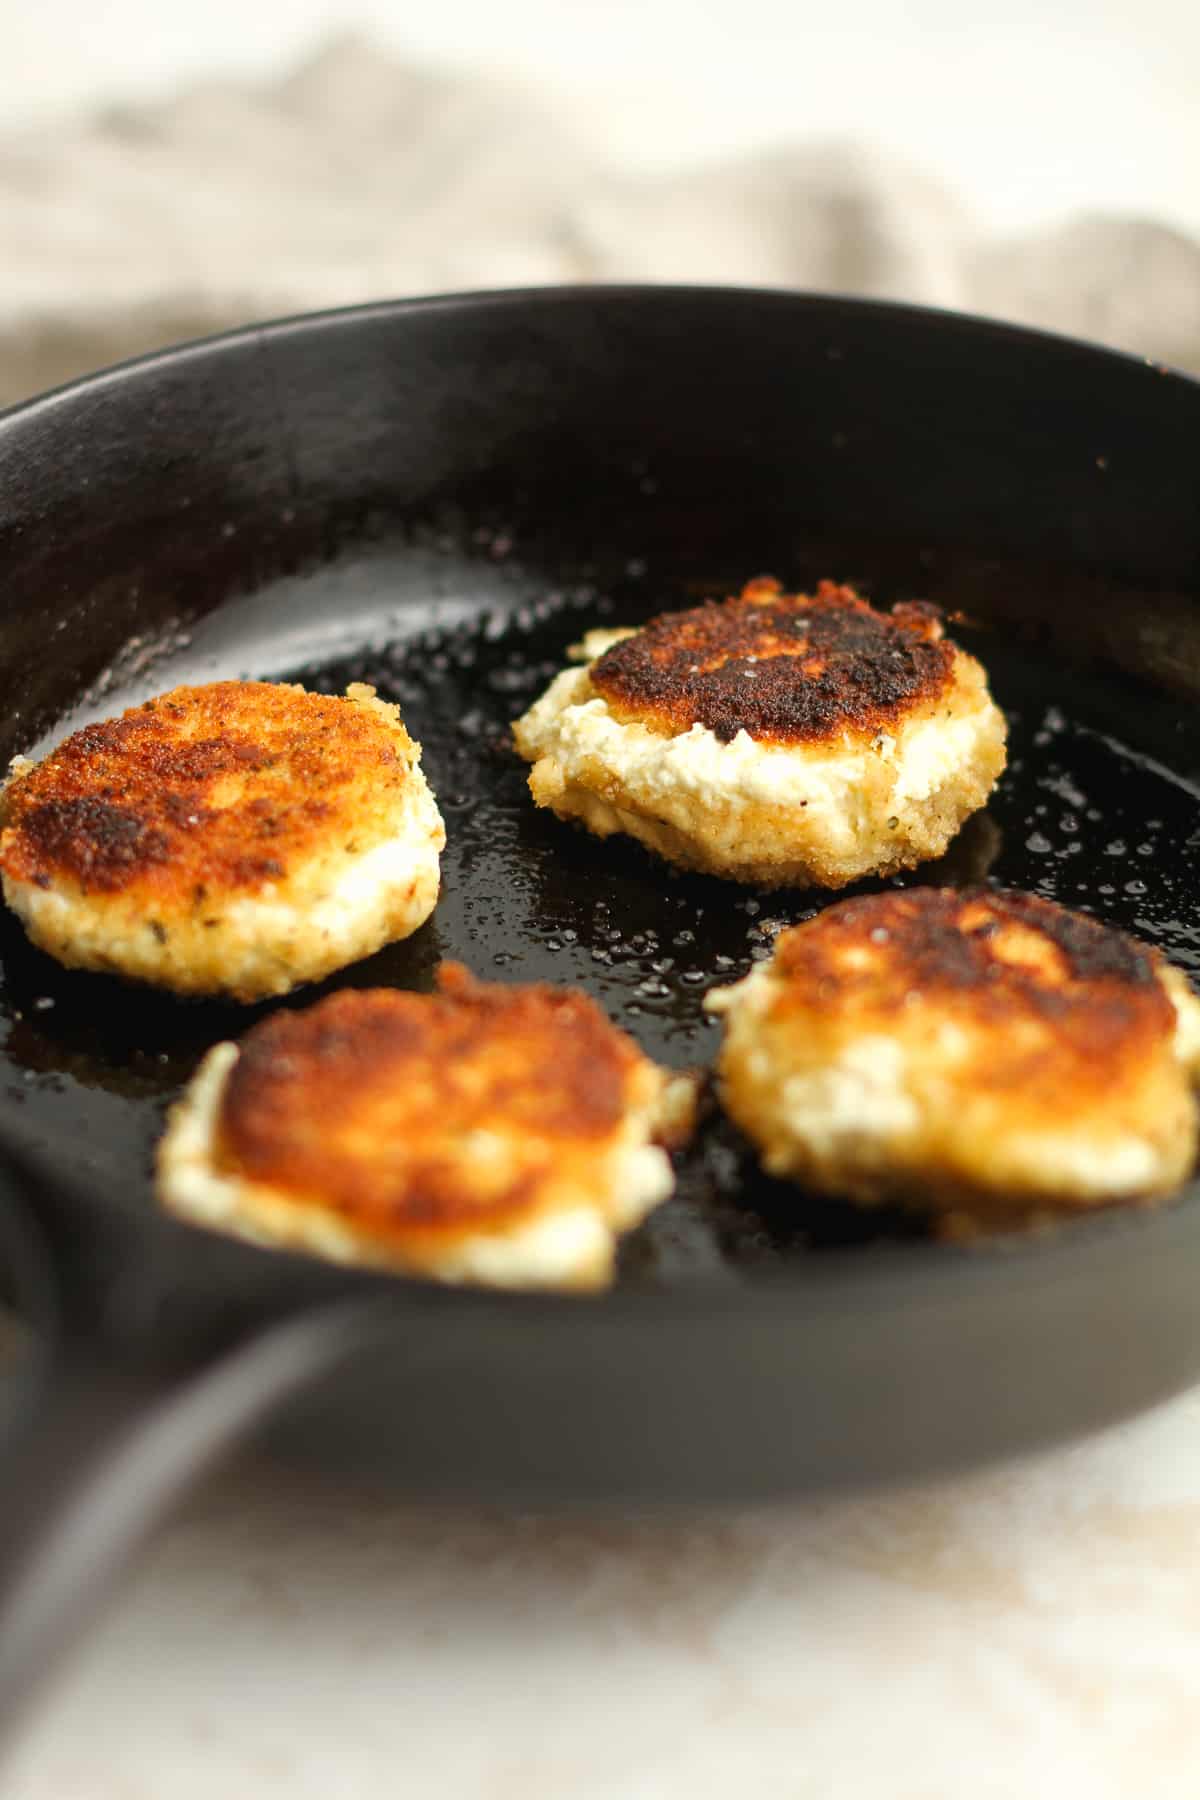 Side view of fried goat cheese in a skillet.